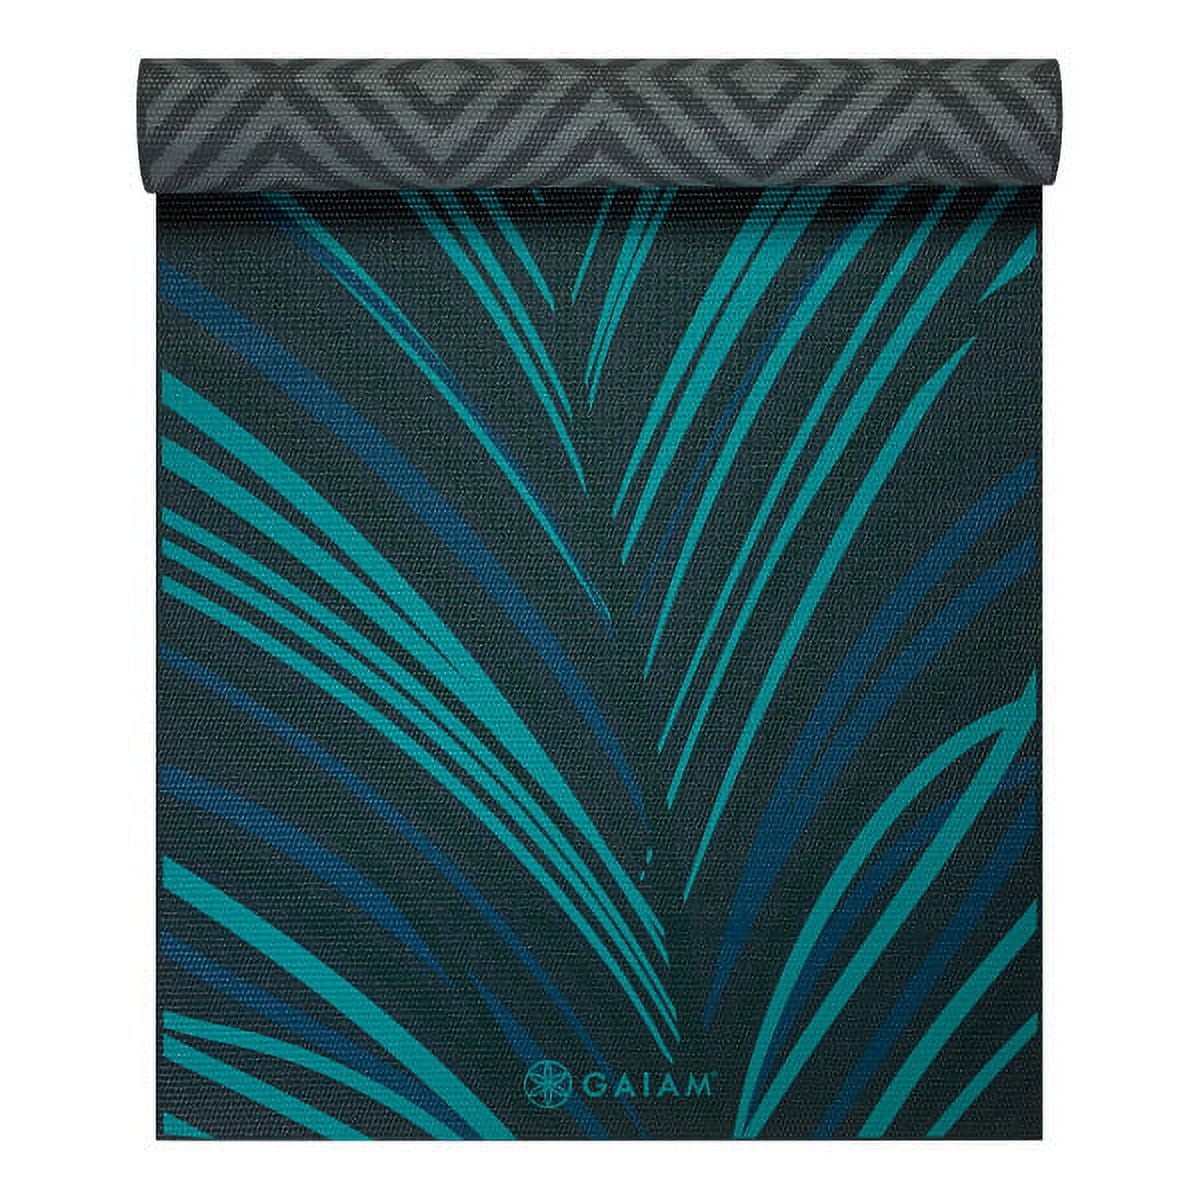 Gaiam Reversible Spiral Motion 6mm Yoga Mat - Fitness Mats For